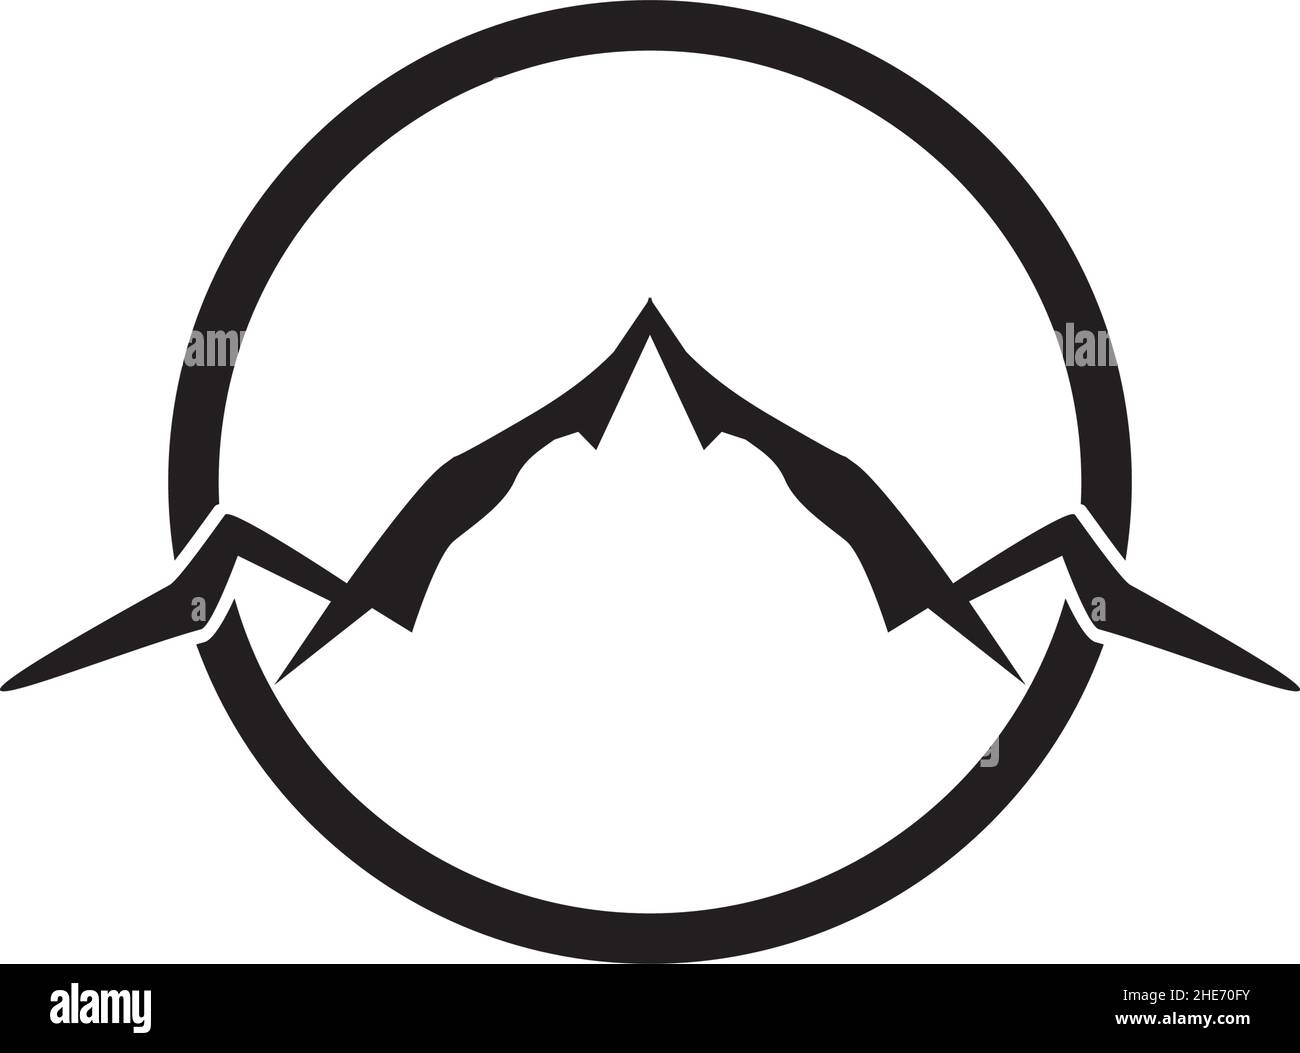 Apparel logo Stock Vector Images - Alamy